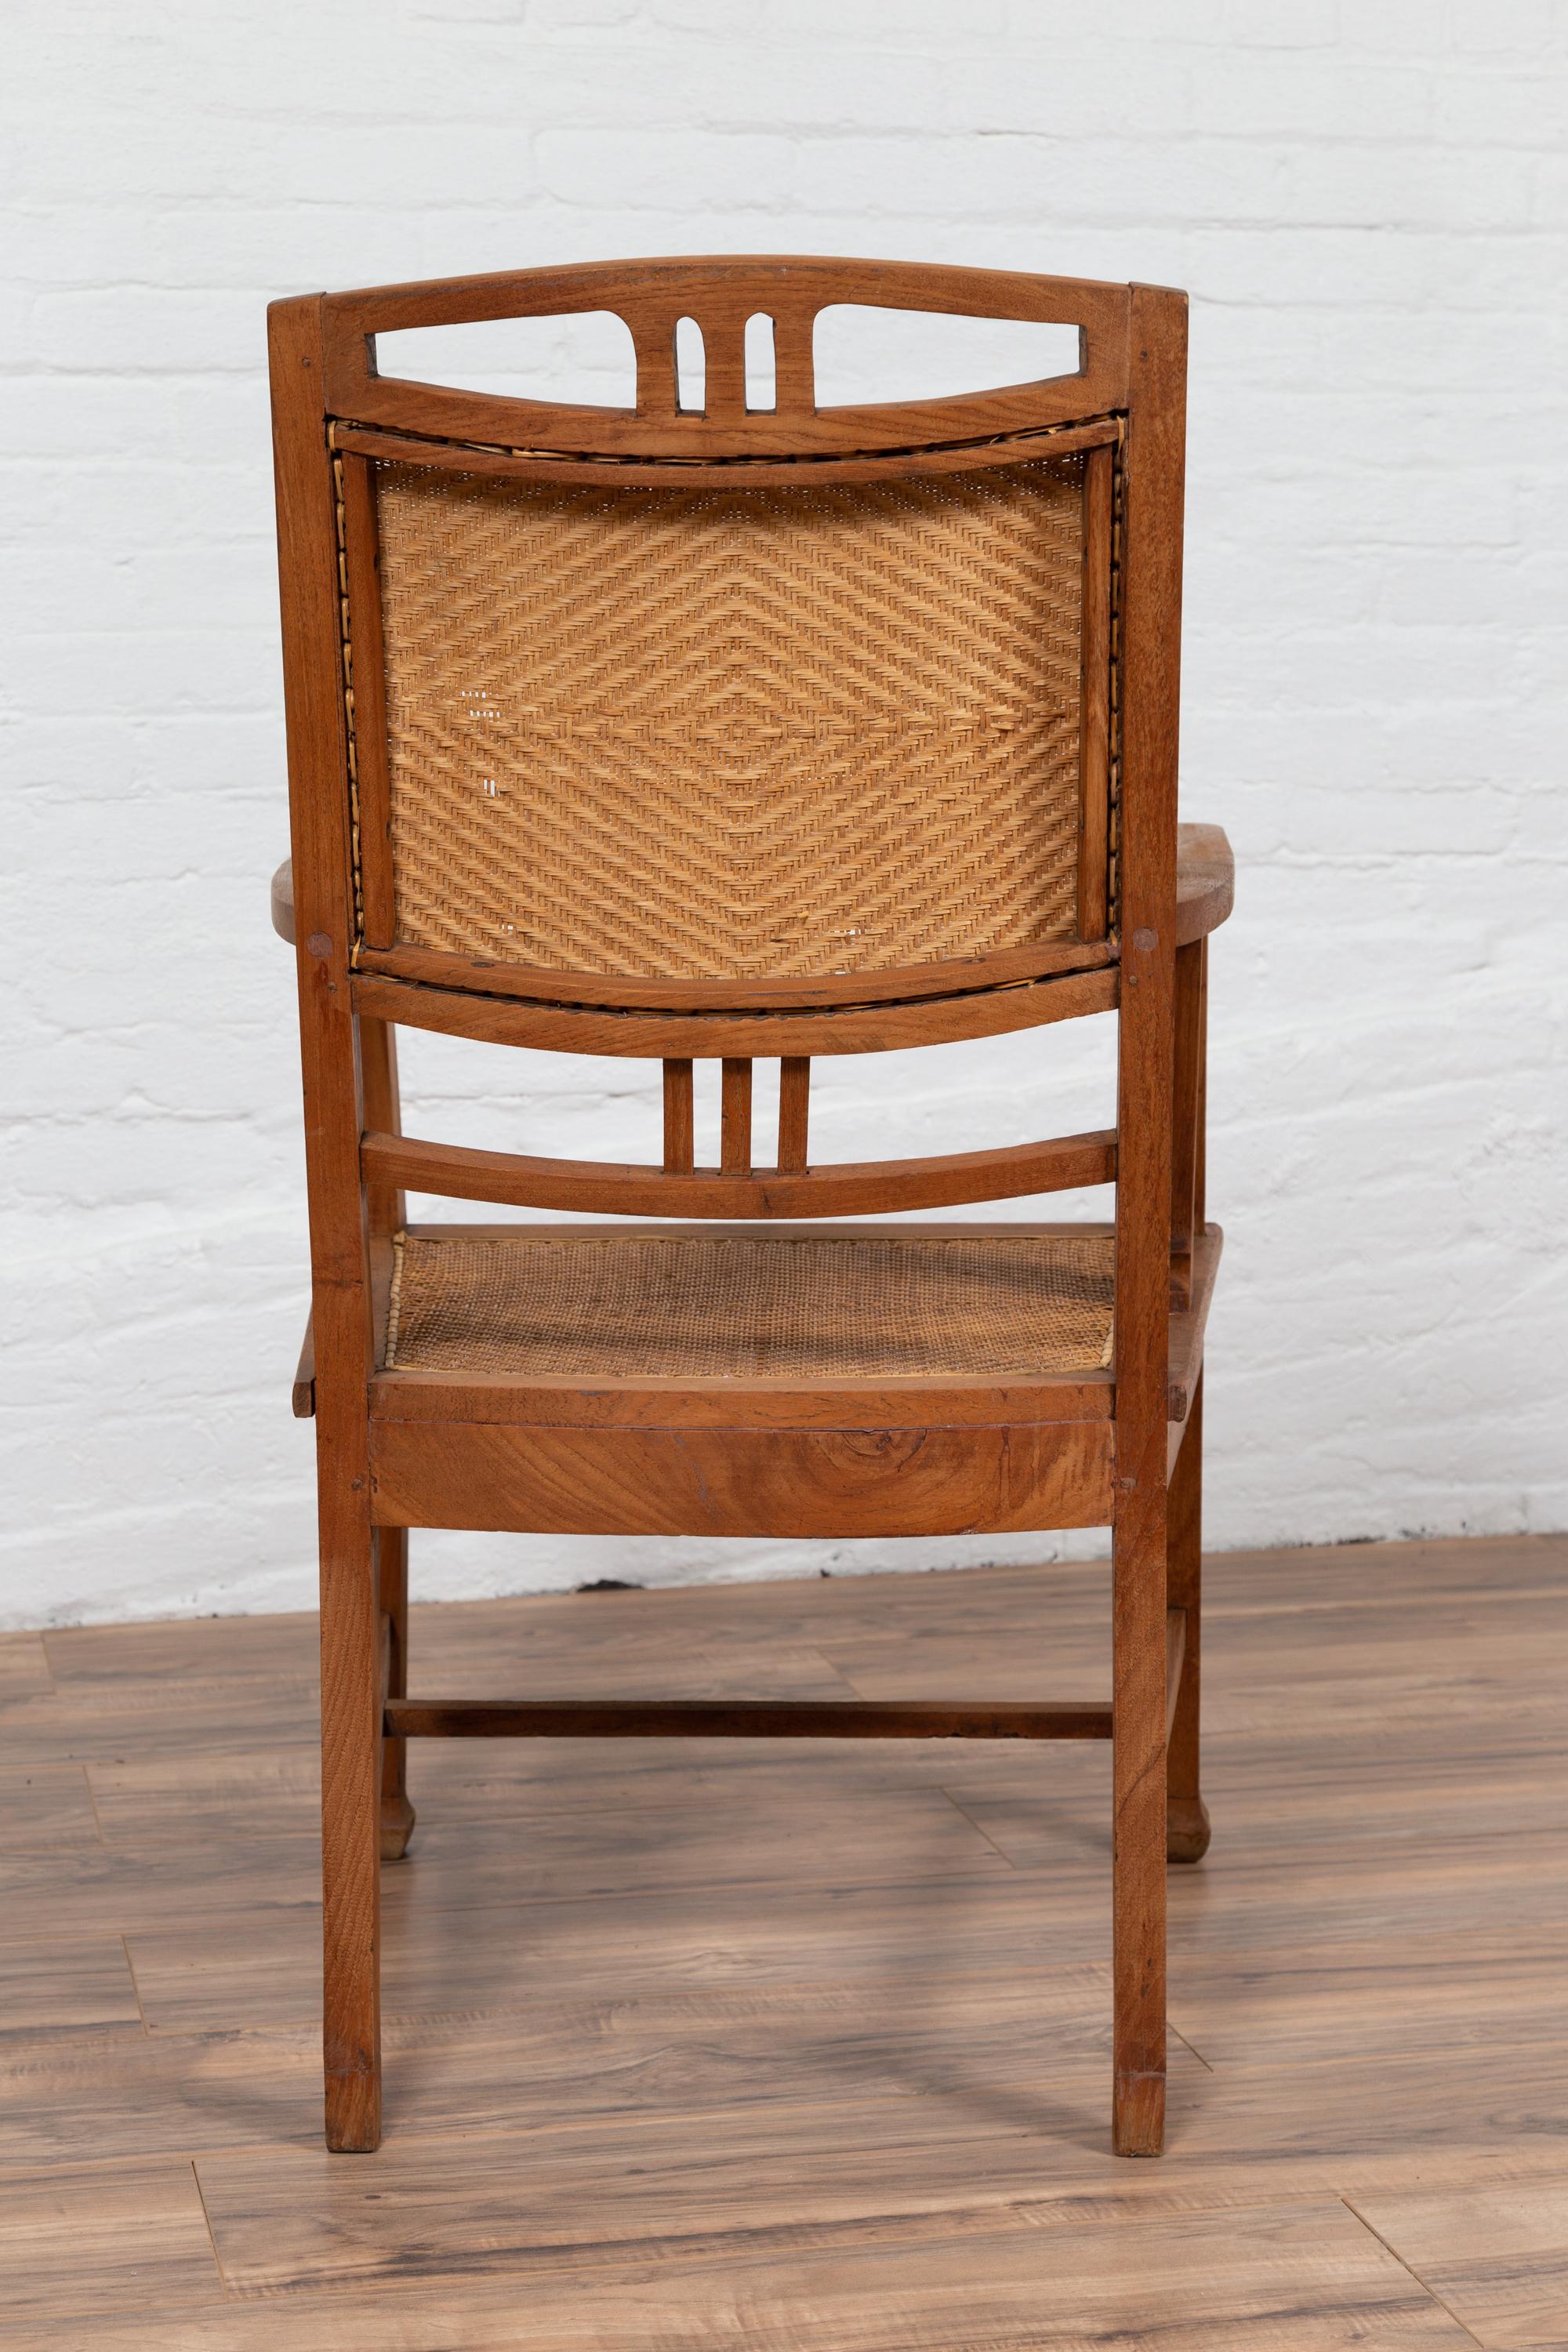 Dutch Colonial Javanese Teak Armchair with Rattan and Triglyph Inspired Motifs For Sale 5